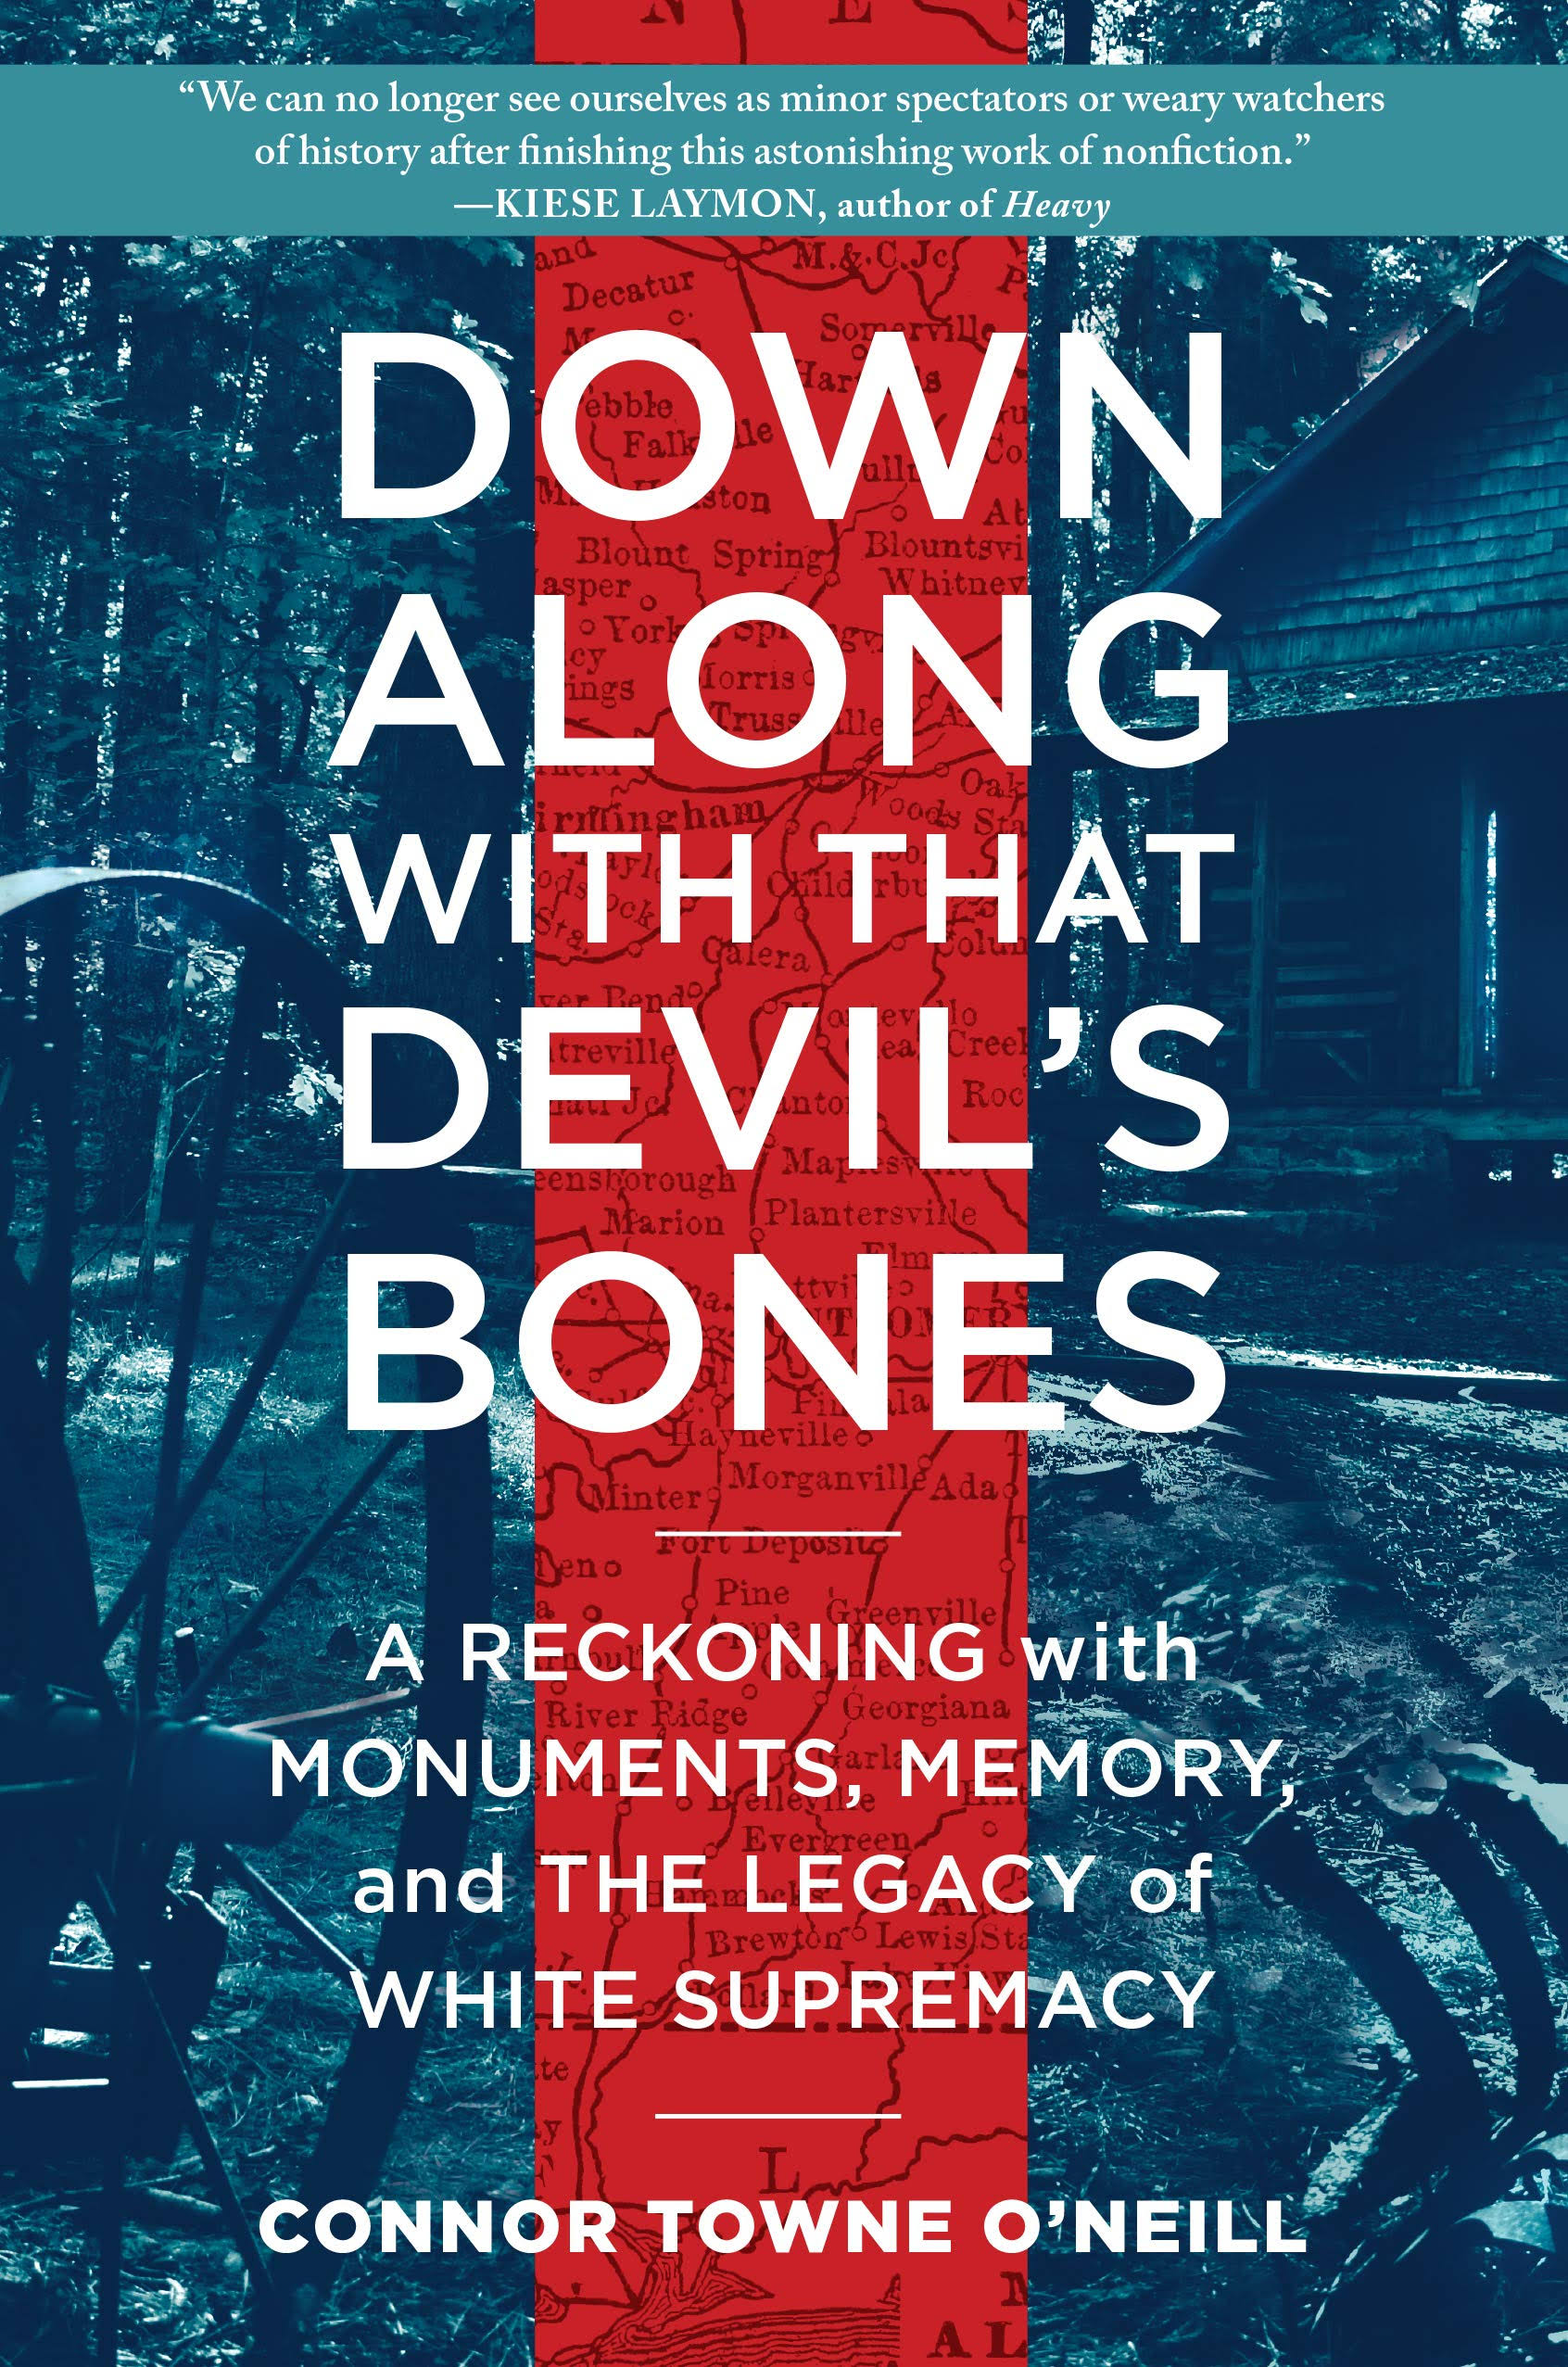 Down Along with That Devil's Bones: A Reckoning with Monuments, Memory, and the Legacy of White Supremacy [Book]